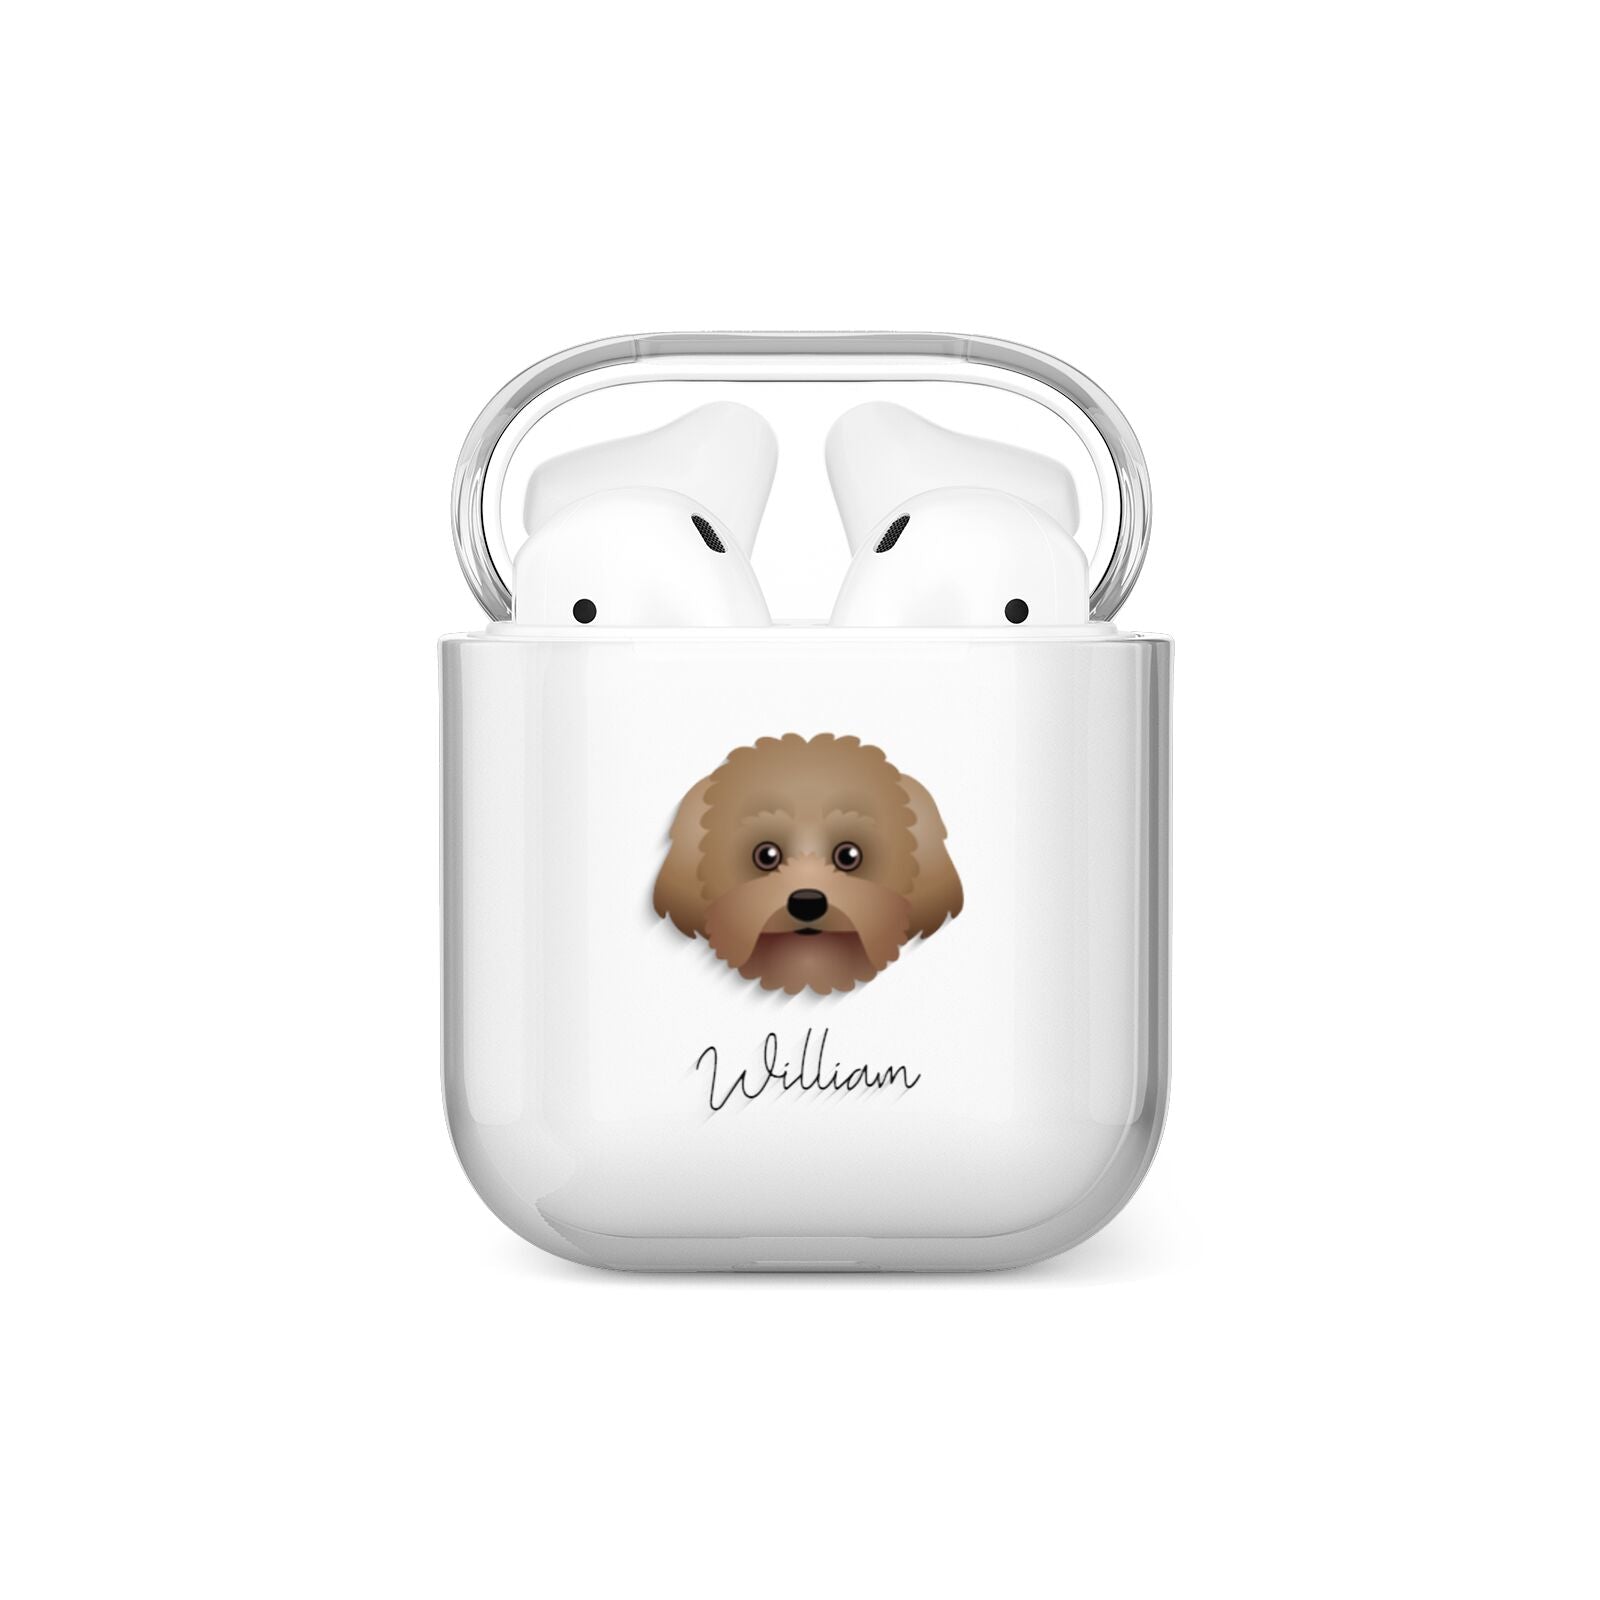 Malti Poo Personalised AirPods Case